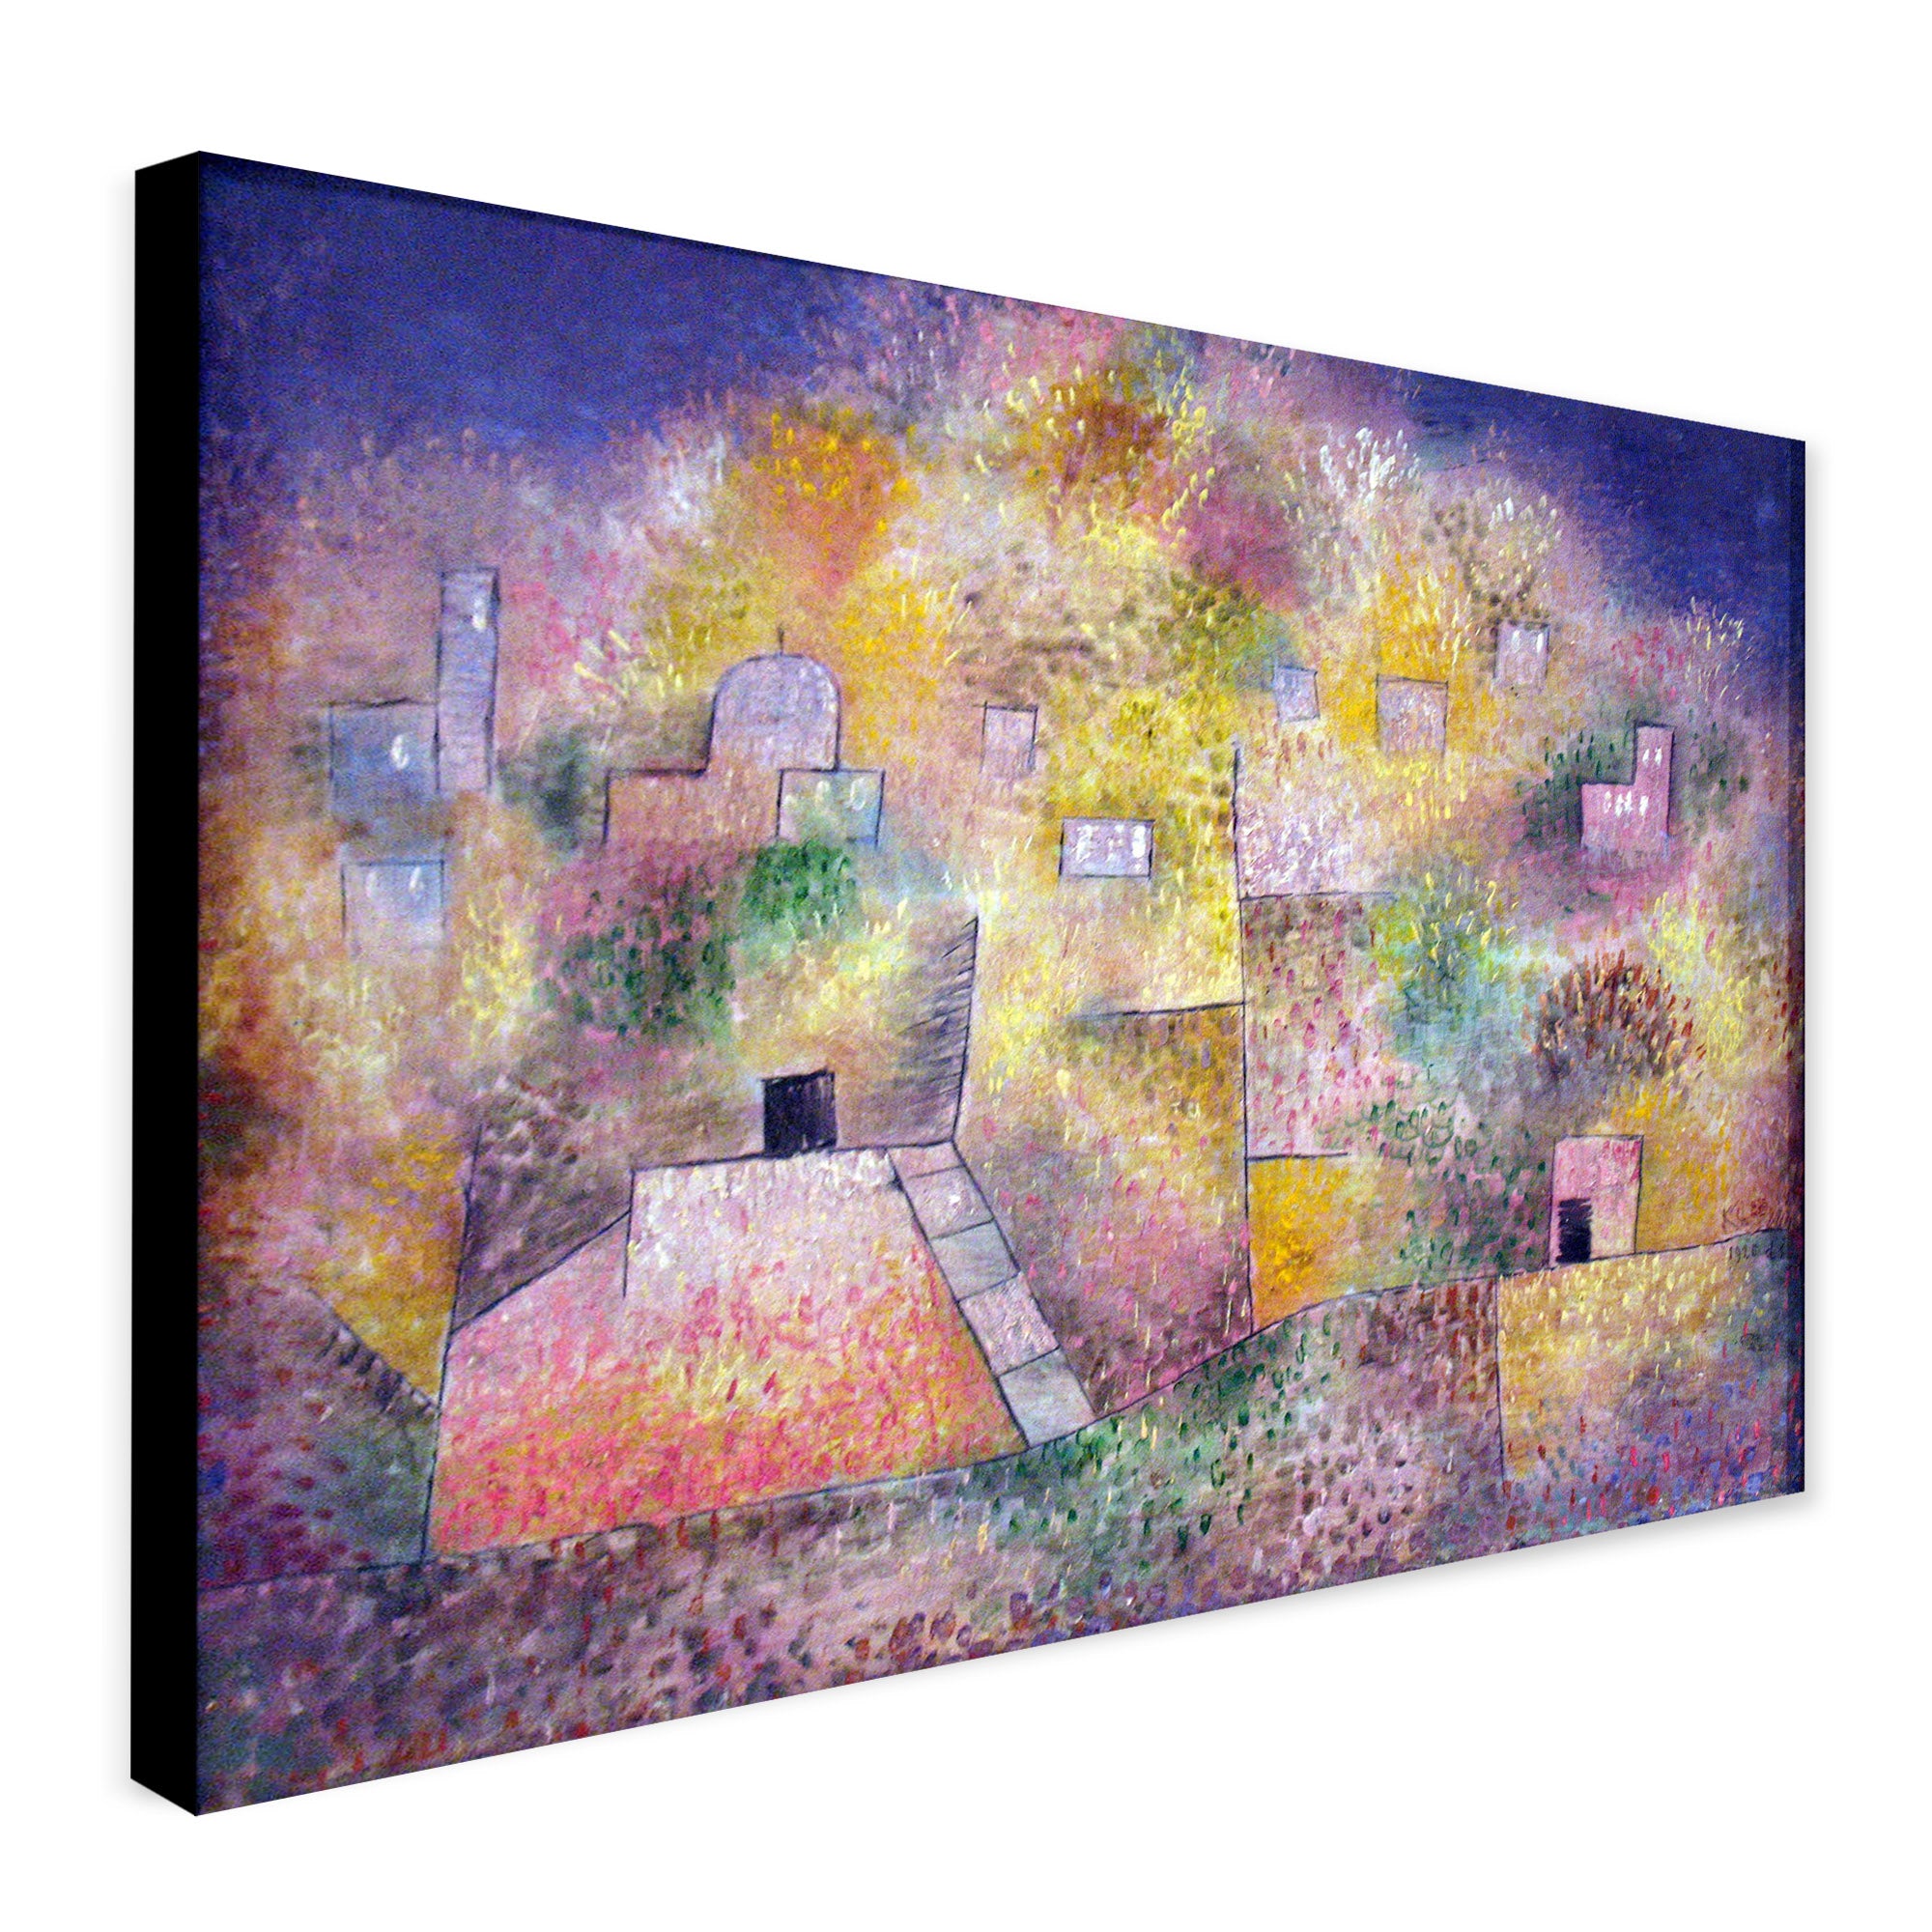 Abstract Oriental Pleasure Garden Anagoria by Paul Klee 1925 - Canvas Wall Art Framed Print - Various Sizes